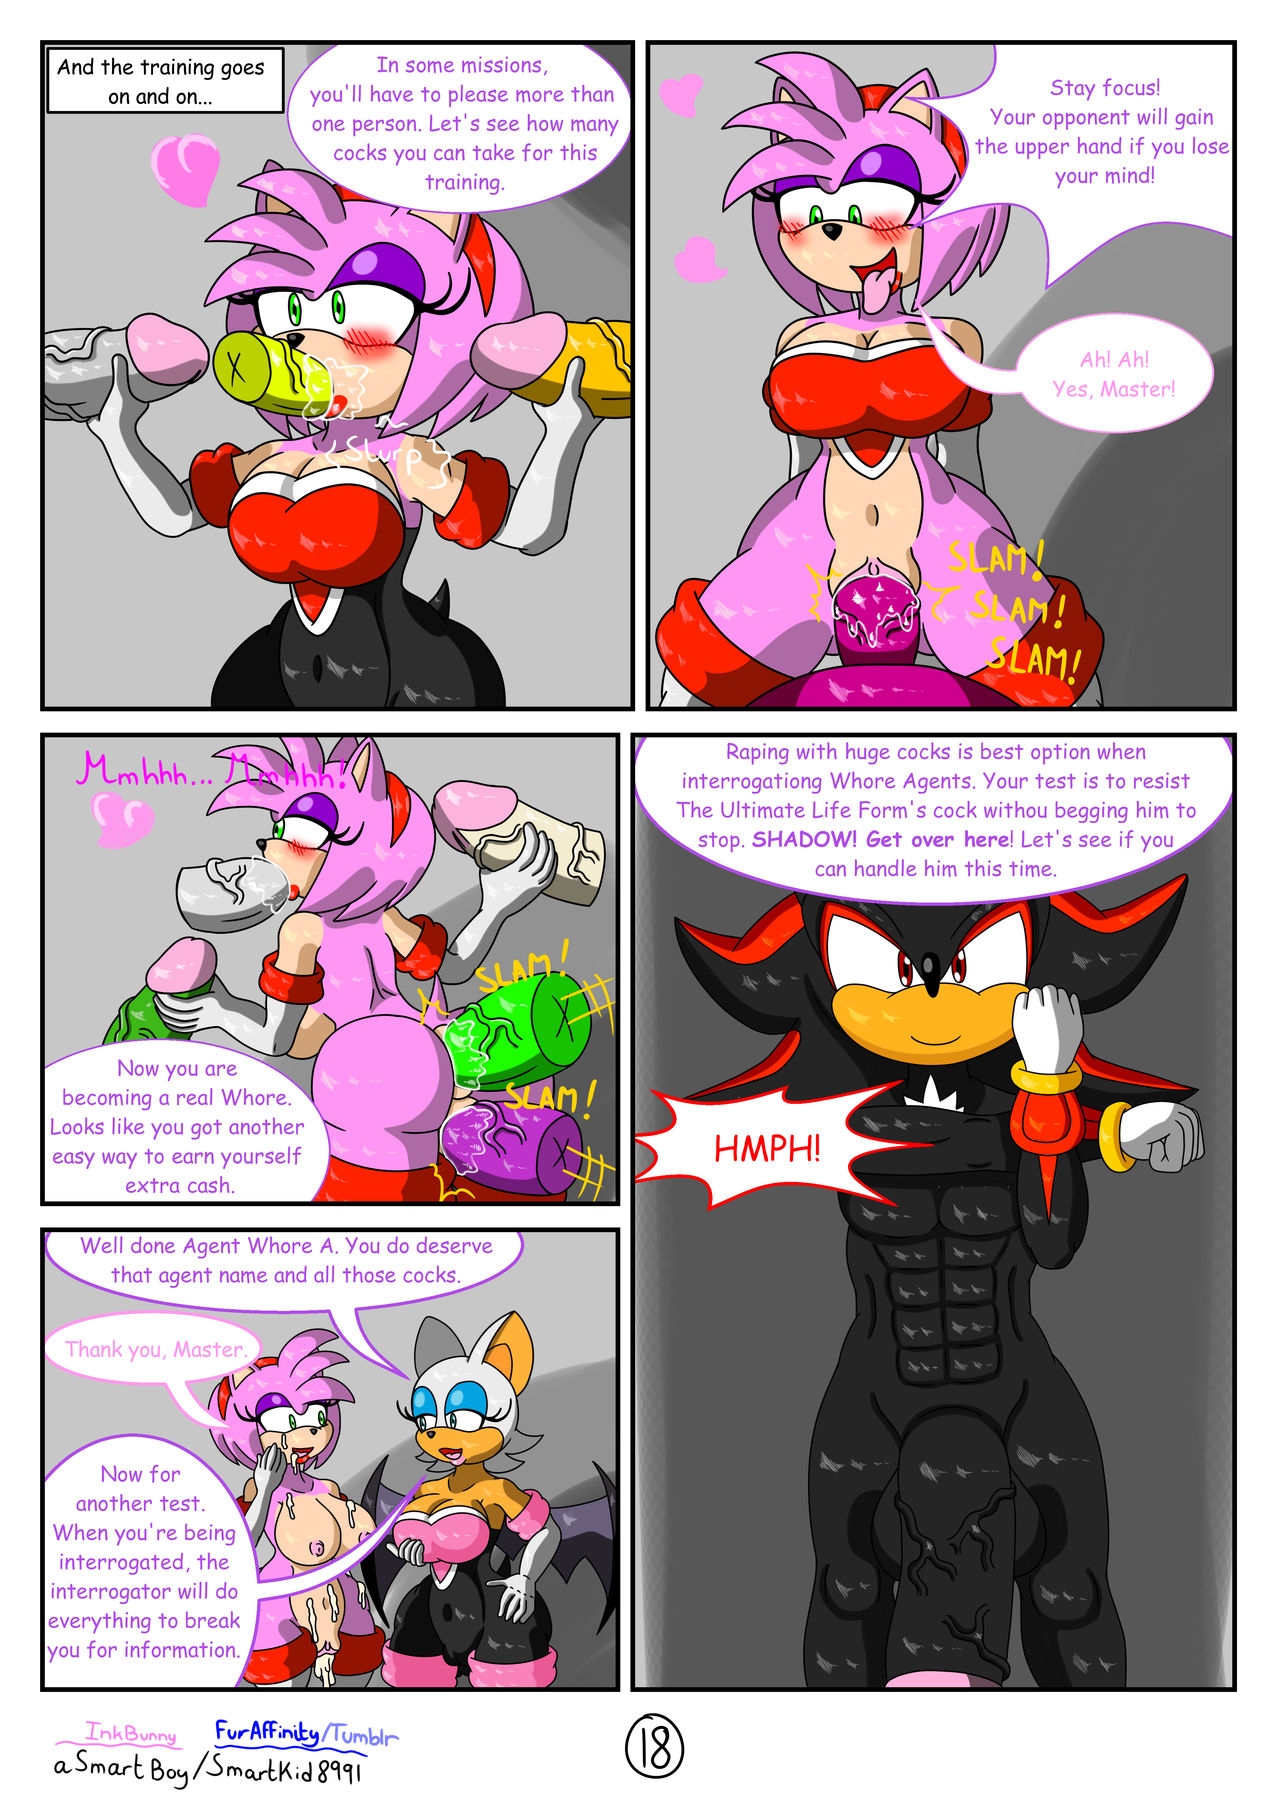 [SmartKid8991] Agent Whore Bootcamp (Sonic The Hedgehog) [Ongoing] 18